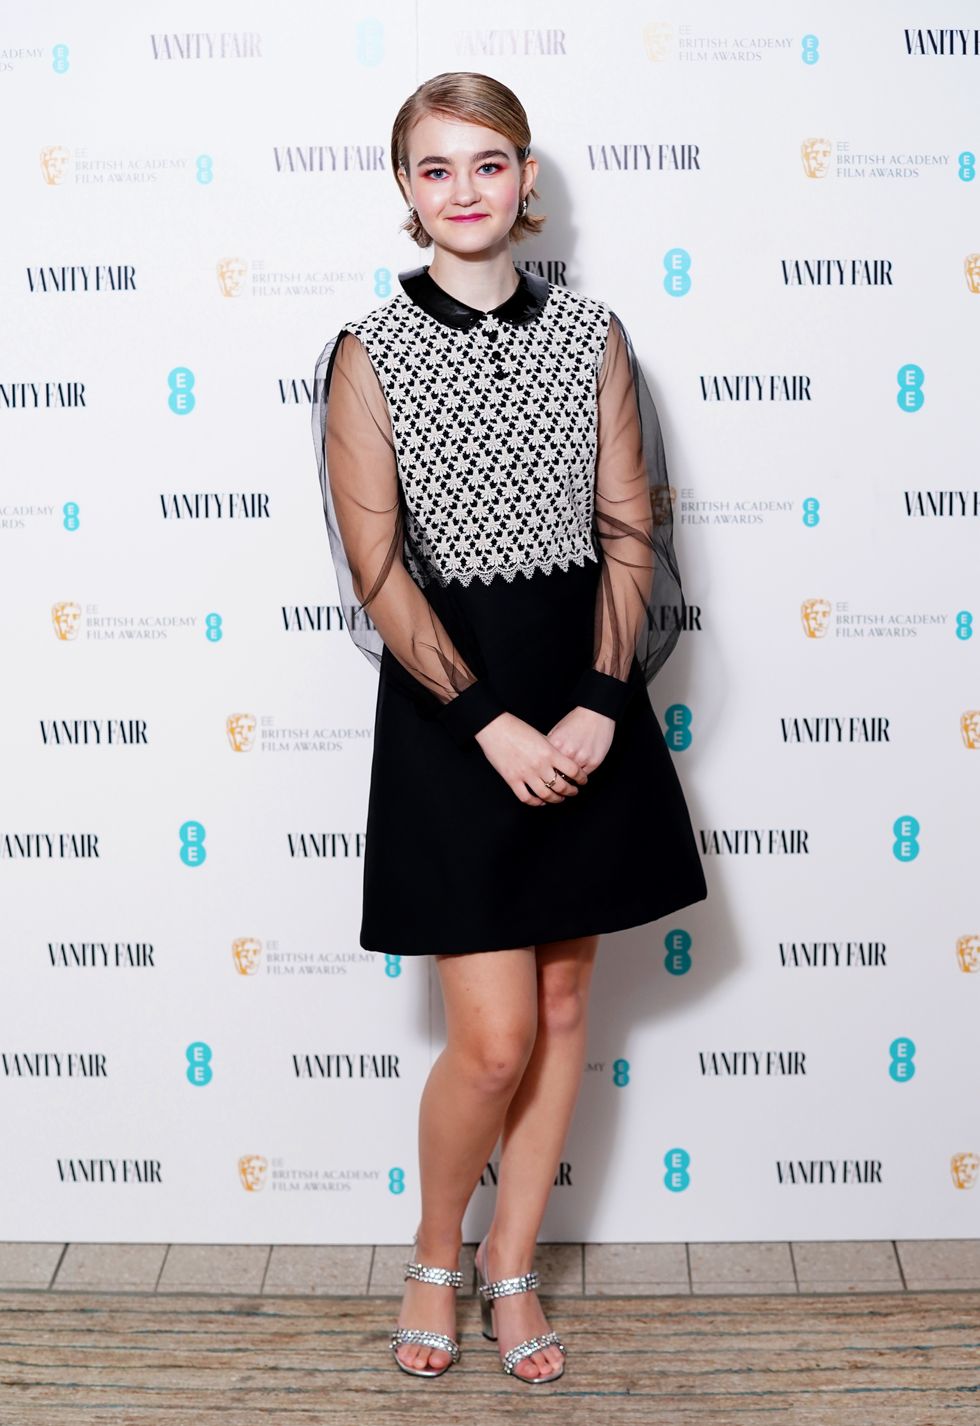 Millicent Simmonds: Representation has helped the deaf community feel limitless